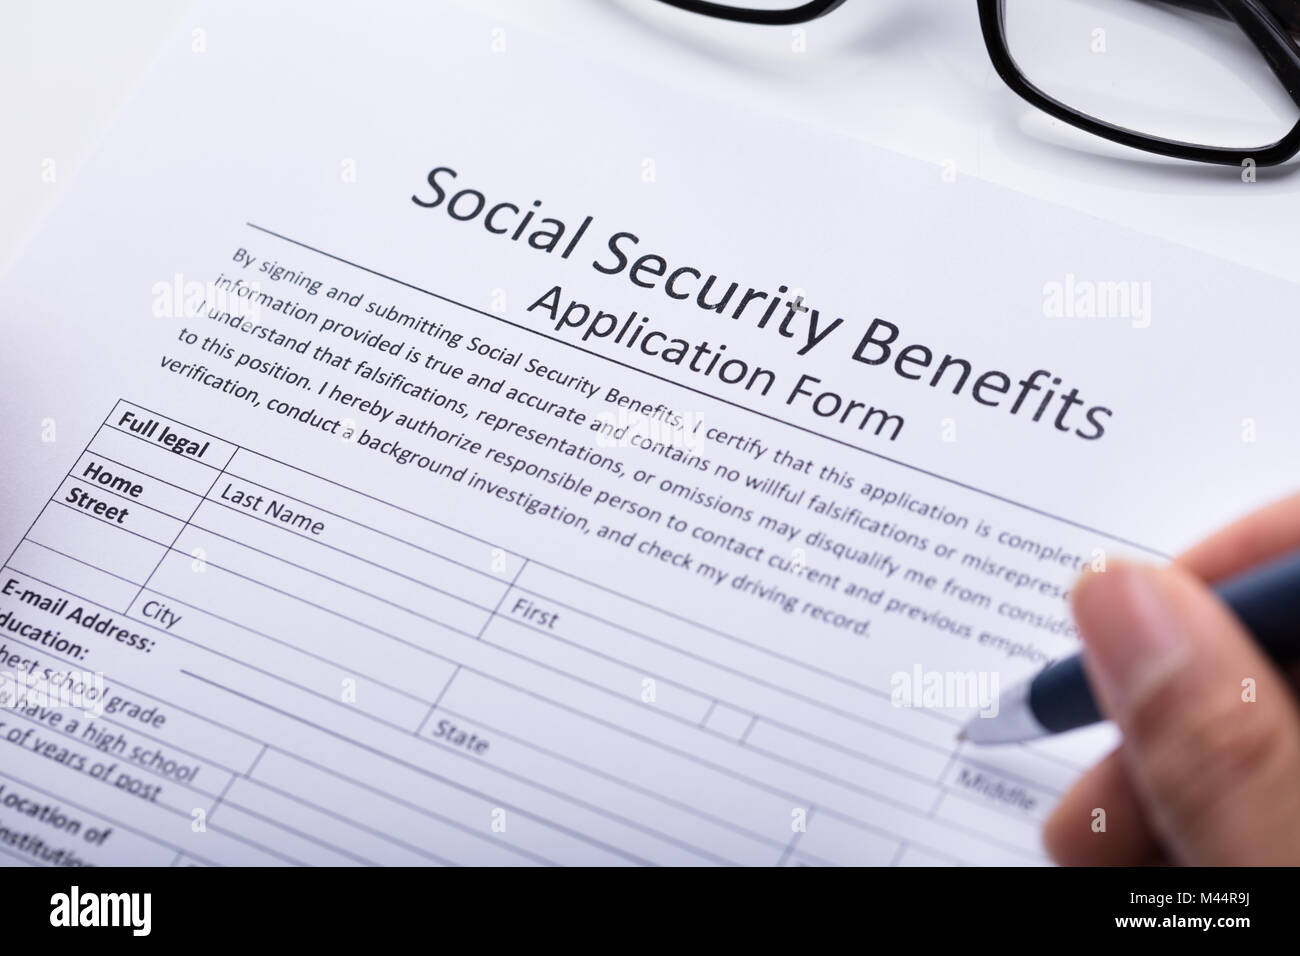 Close-up Of A Person's Hand Filling Social Security Benefits Application Form Stock Photo